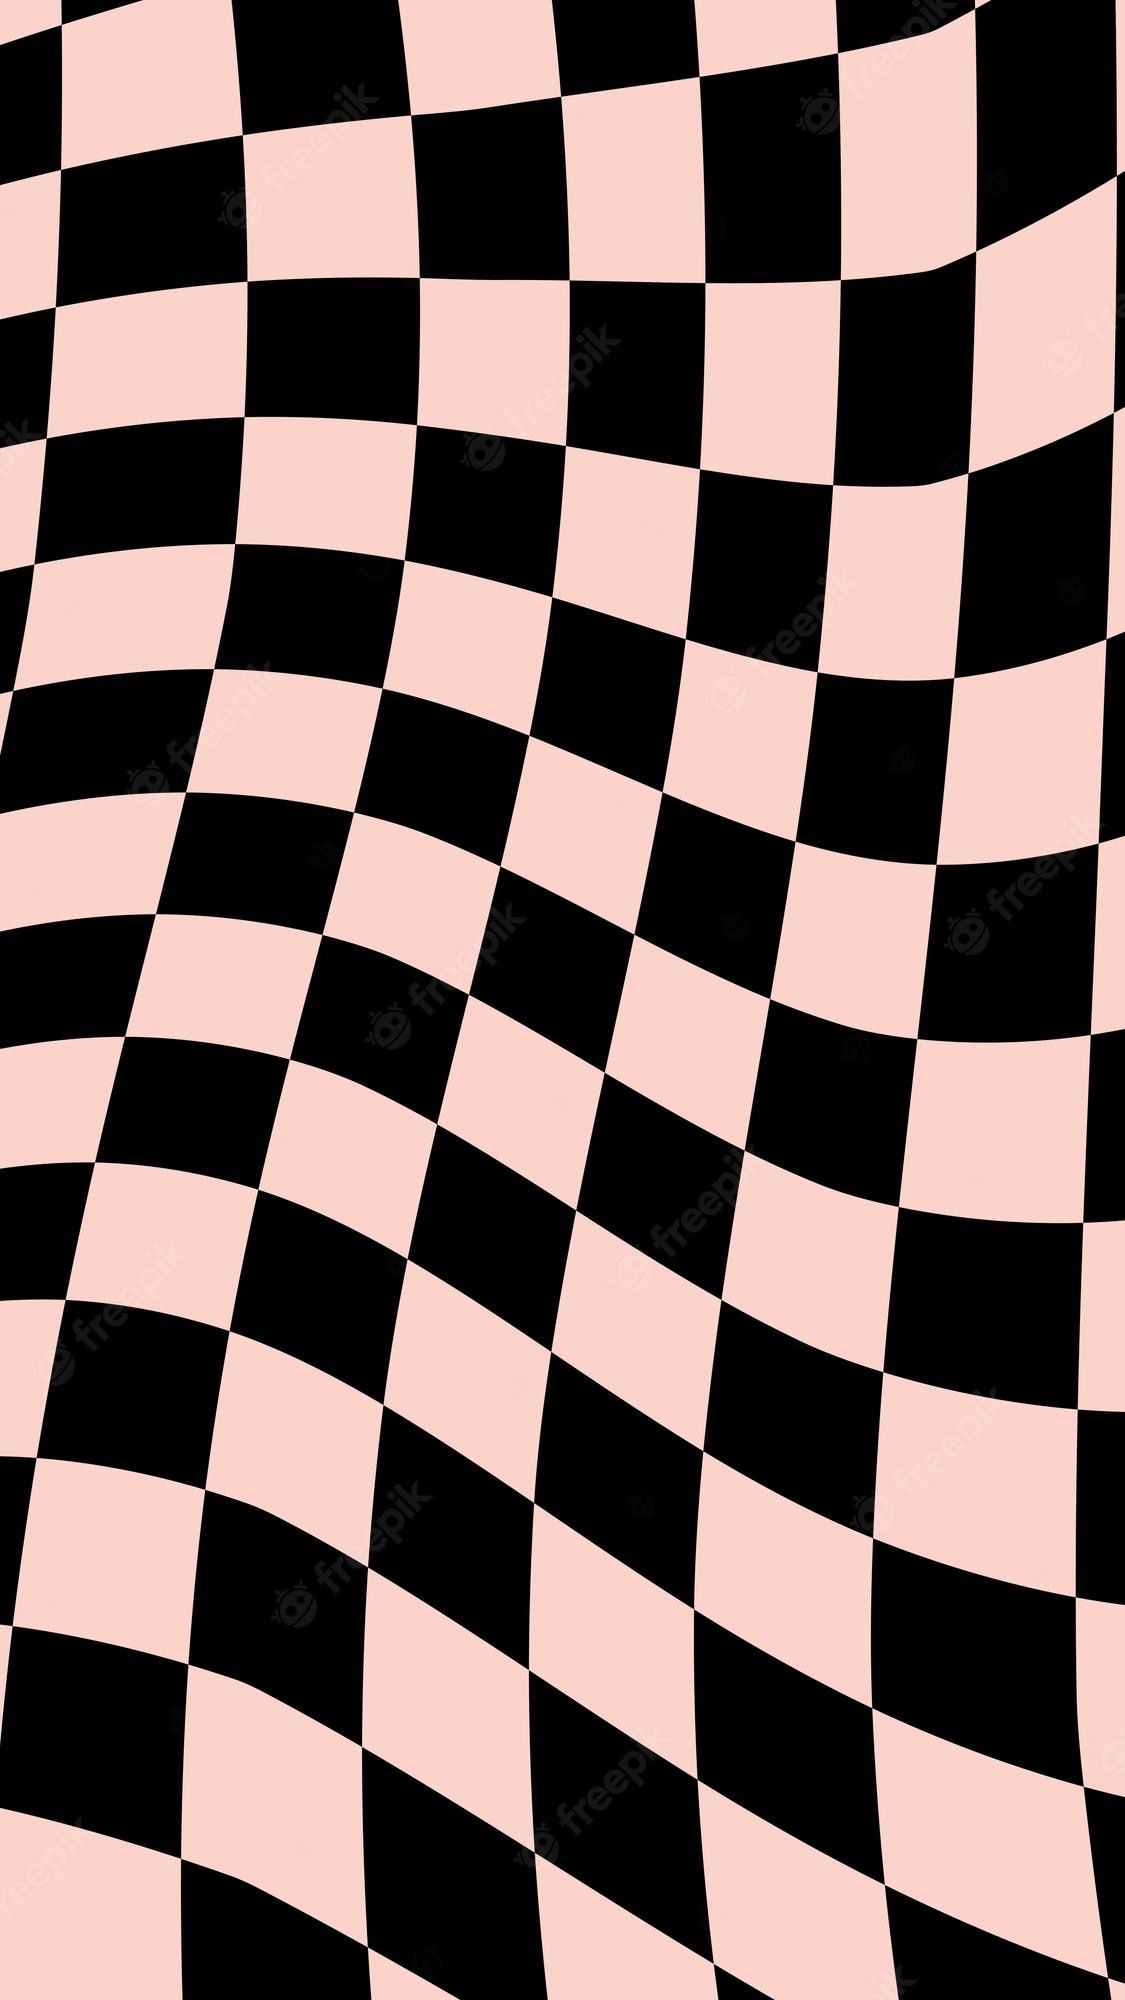 A black and white checkered pattern on pink - Pastel orange, checkered